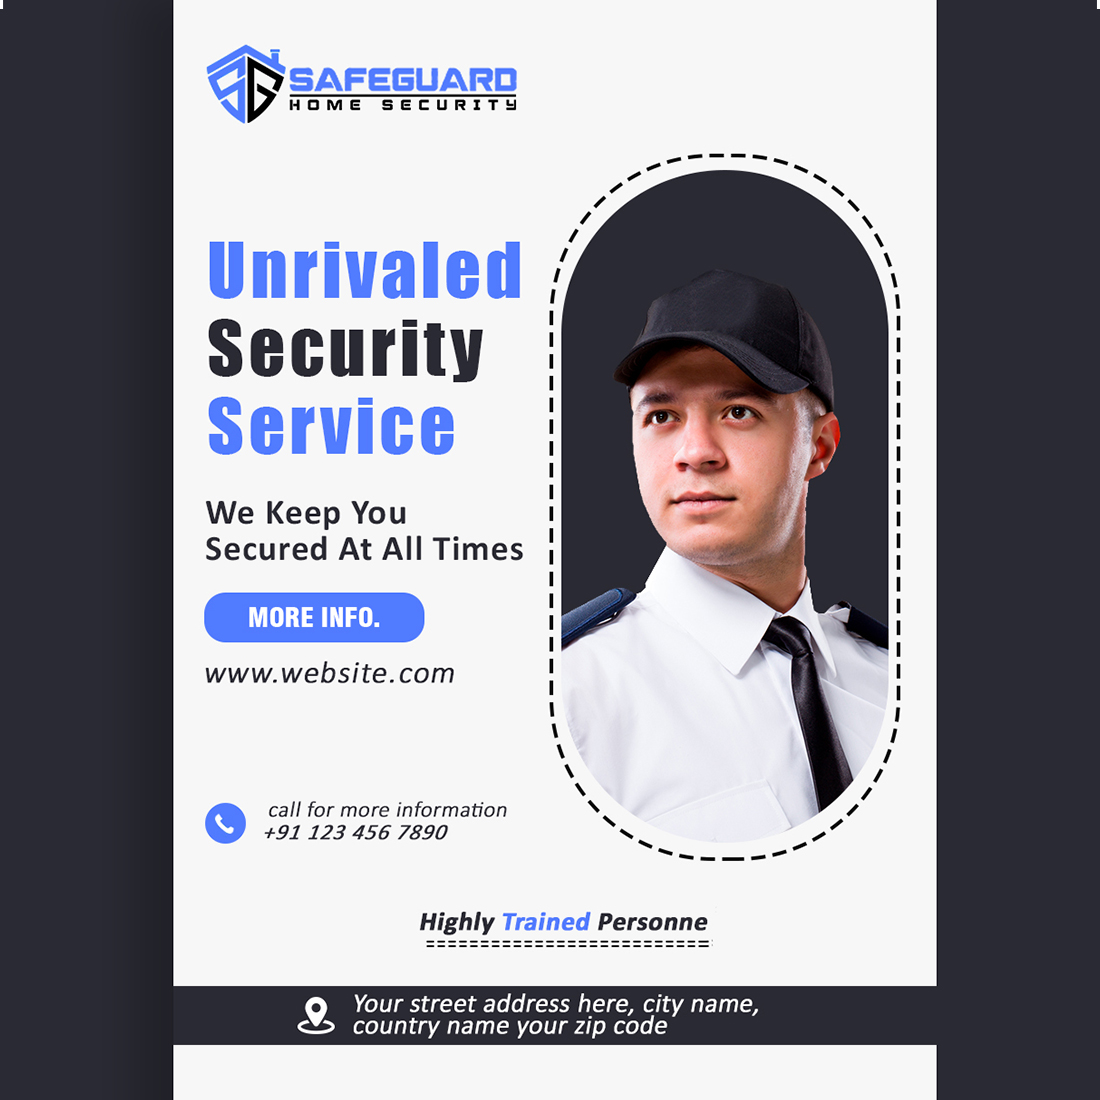 security service banner01 334